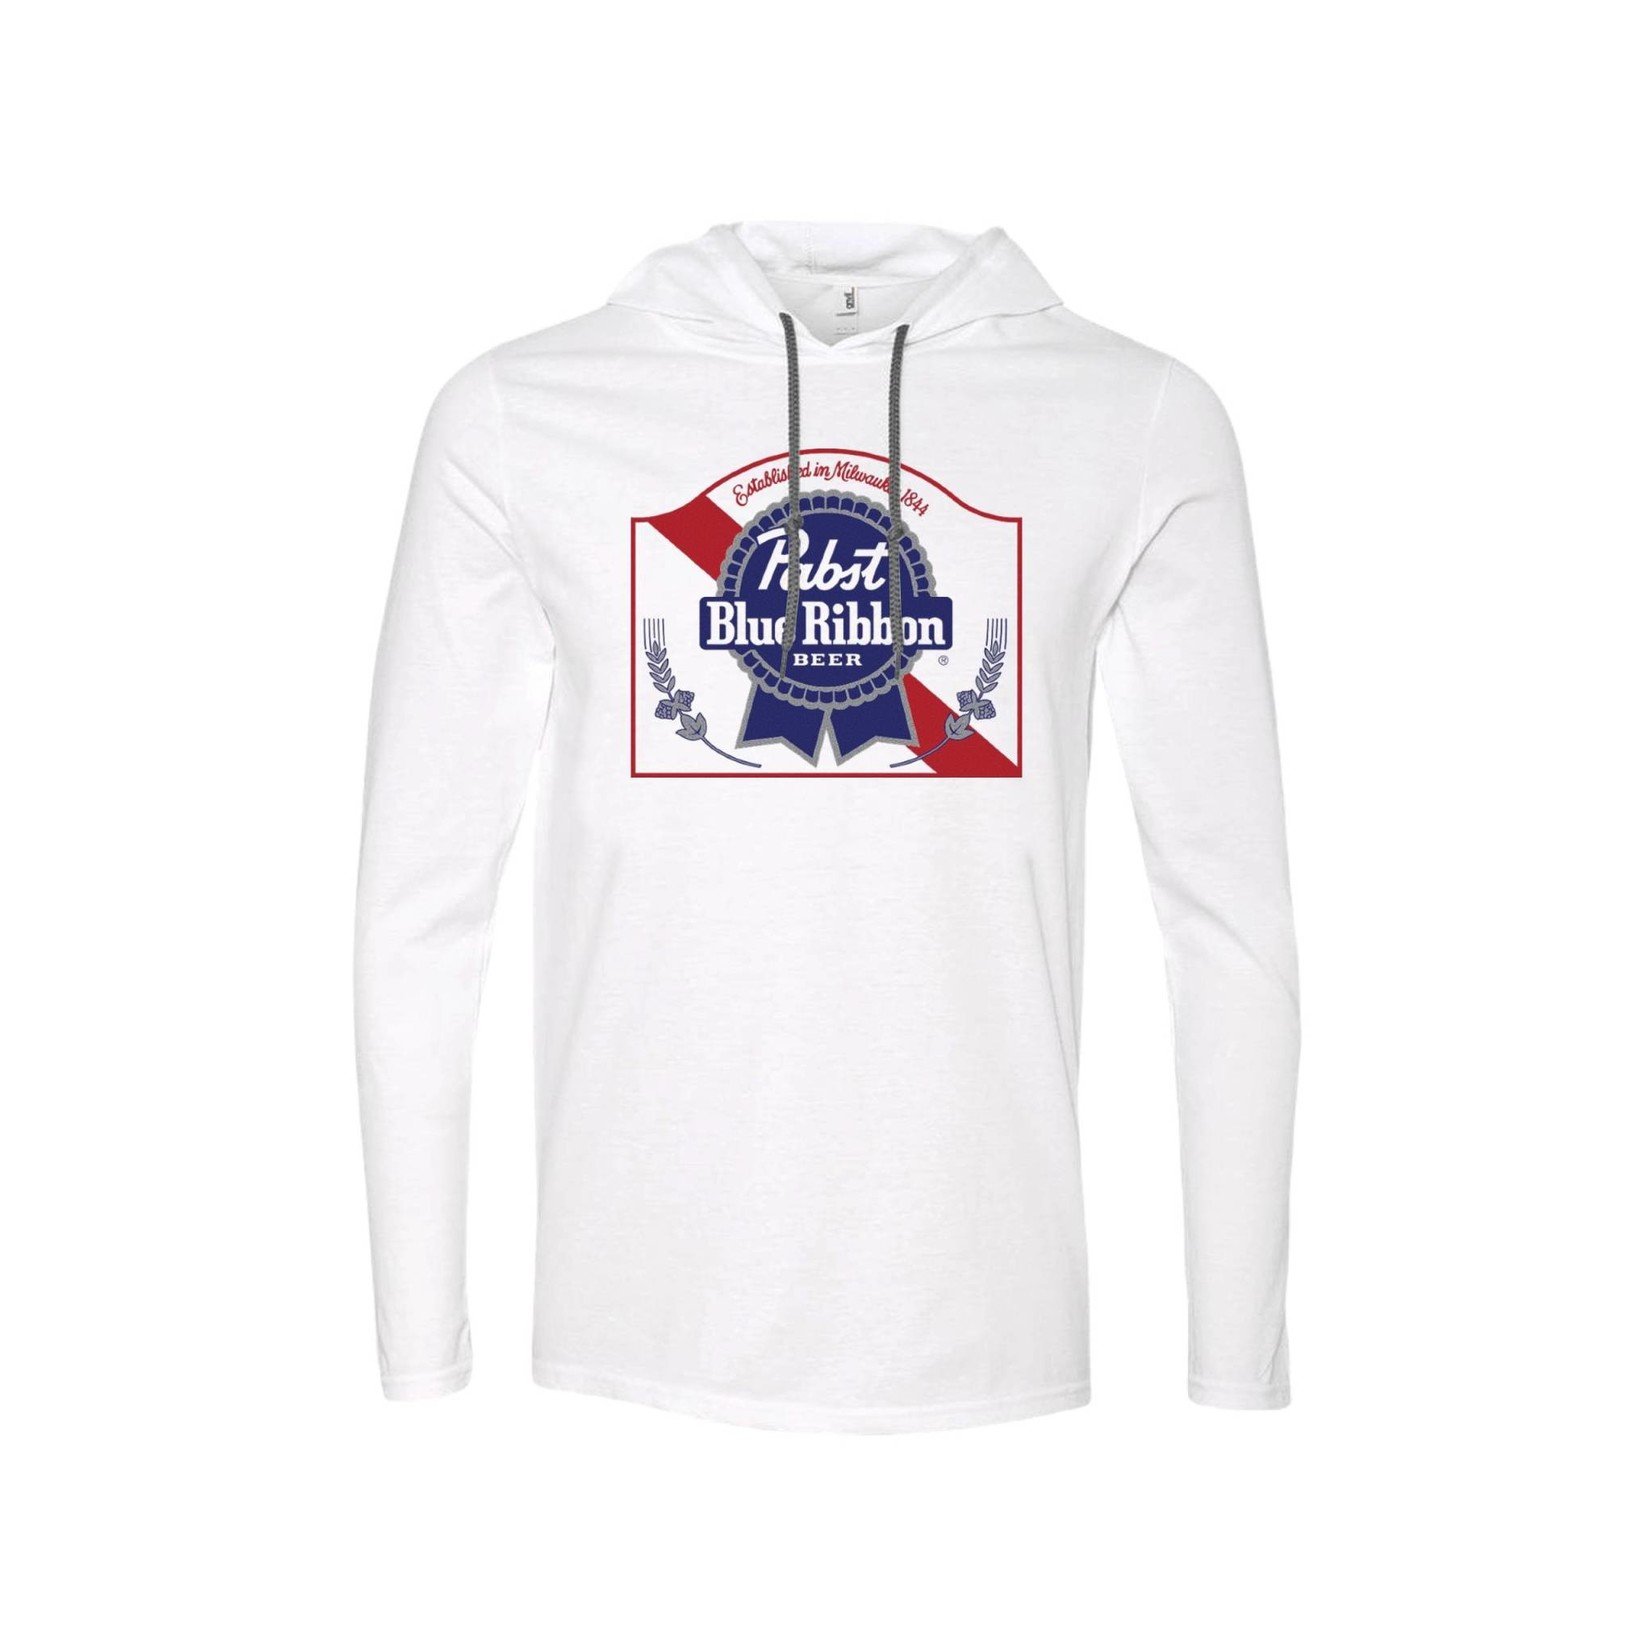 Pabst Pabst Arch White Hooded Long Sleeve Tee